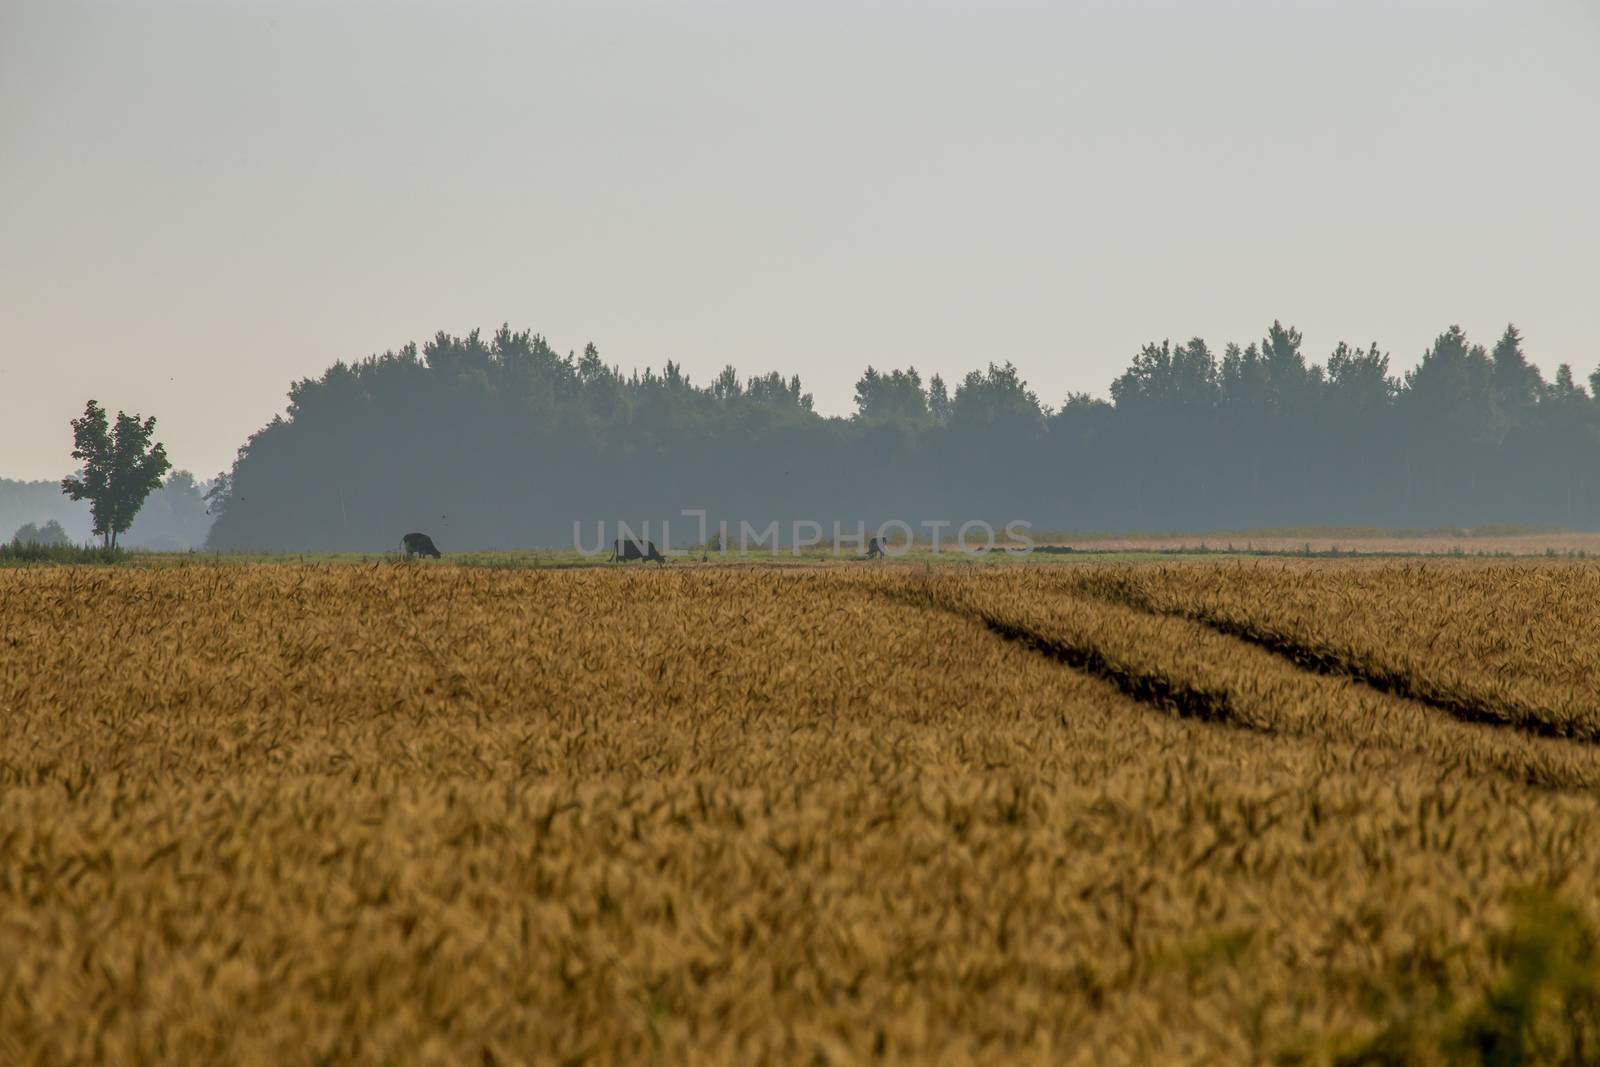 Mist on the cereal field. Road path in cereal field landscape in summer. Tractor tire tracks on the field in Latvia. Cows are grazing in the distance. Classic rural landscape with fog in Latvia.